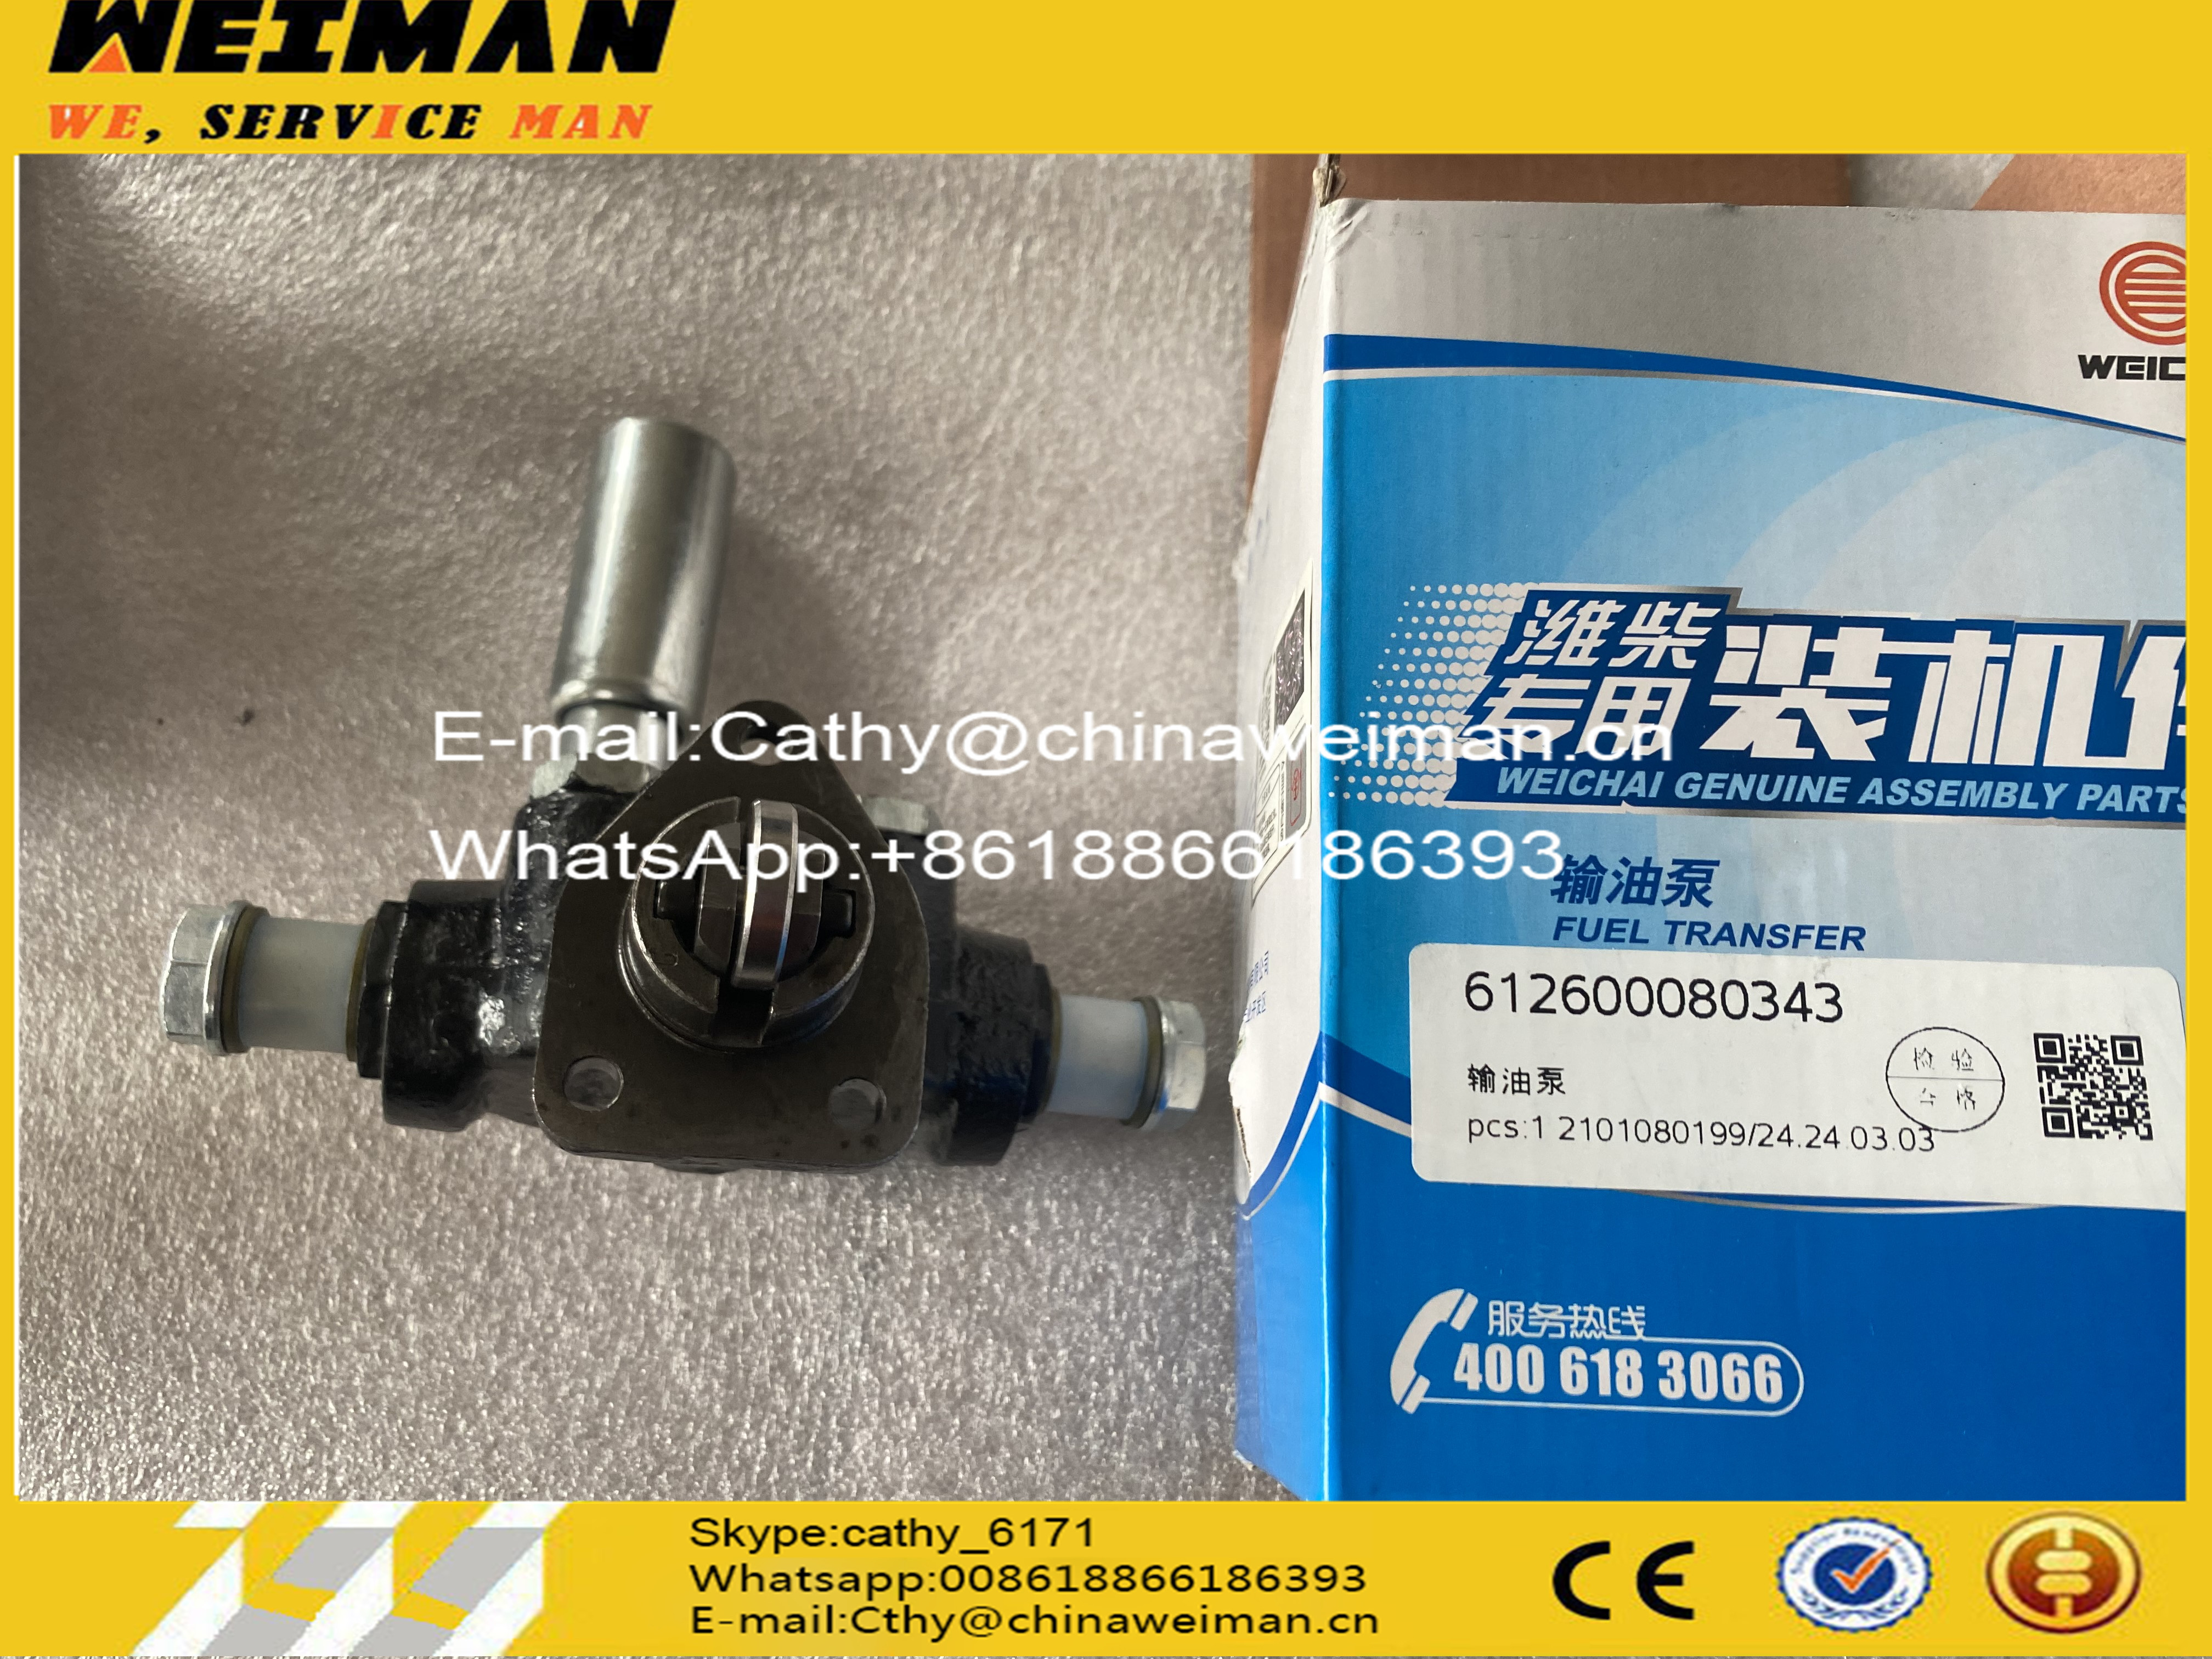 Hot sale 612600080343 FUEL HAND PUMP for WD615 WP10 Engine